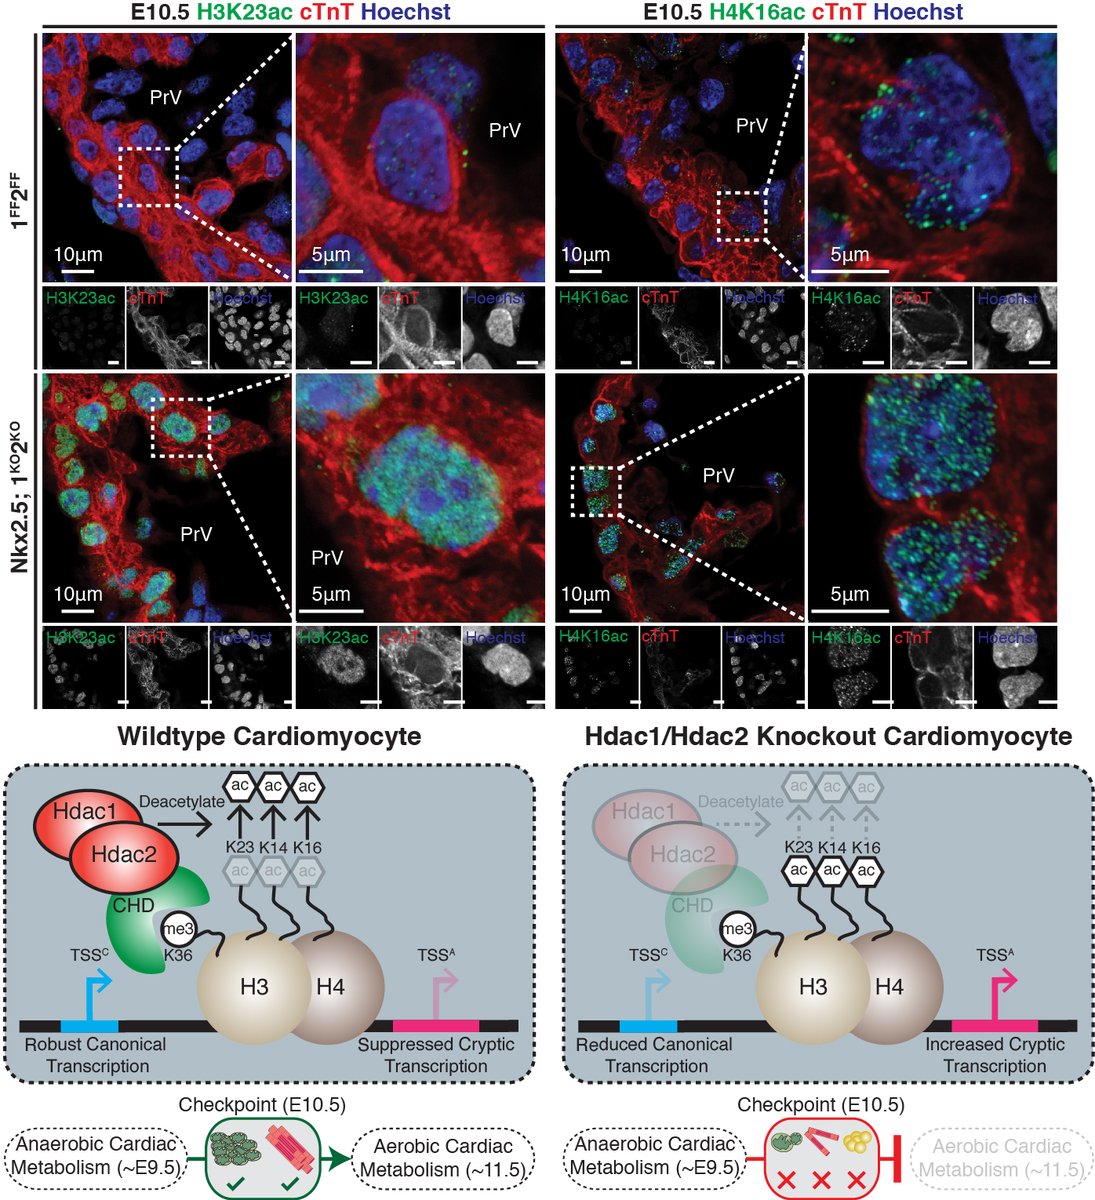 A recent study from our lab @UMassMedical @GSBS_UMassMed shows Hdac1/2 silence cryptic transcription to promote mitochondrial function and energy production in heart @ScienceAdvances Awesome collaboration with @chaynes329 advances.sciencemag.org/content/6/15/e…